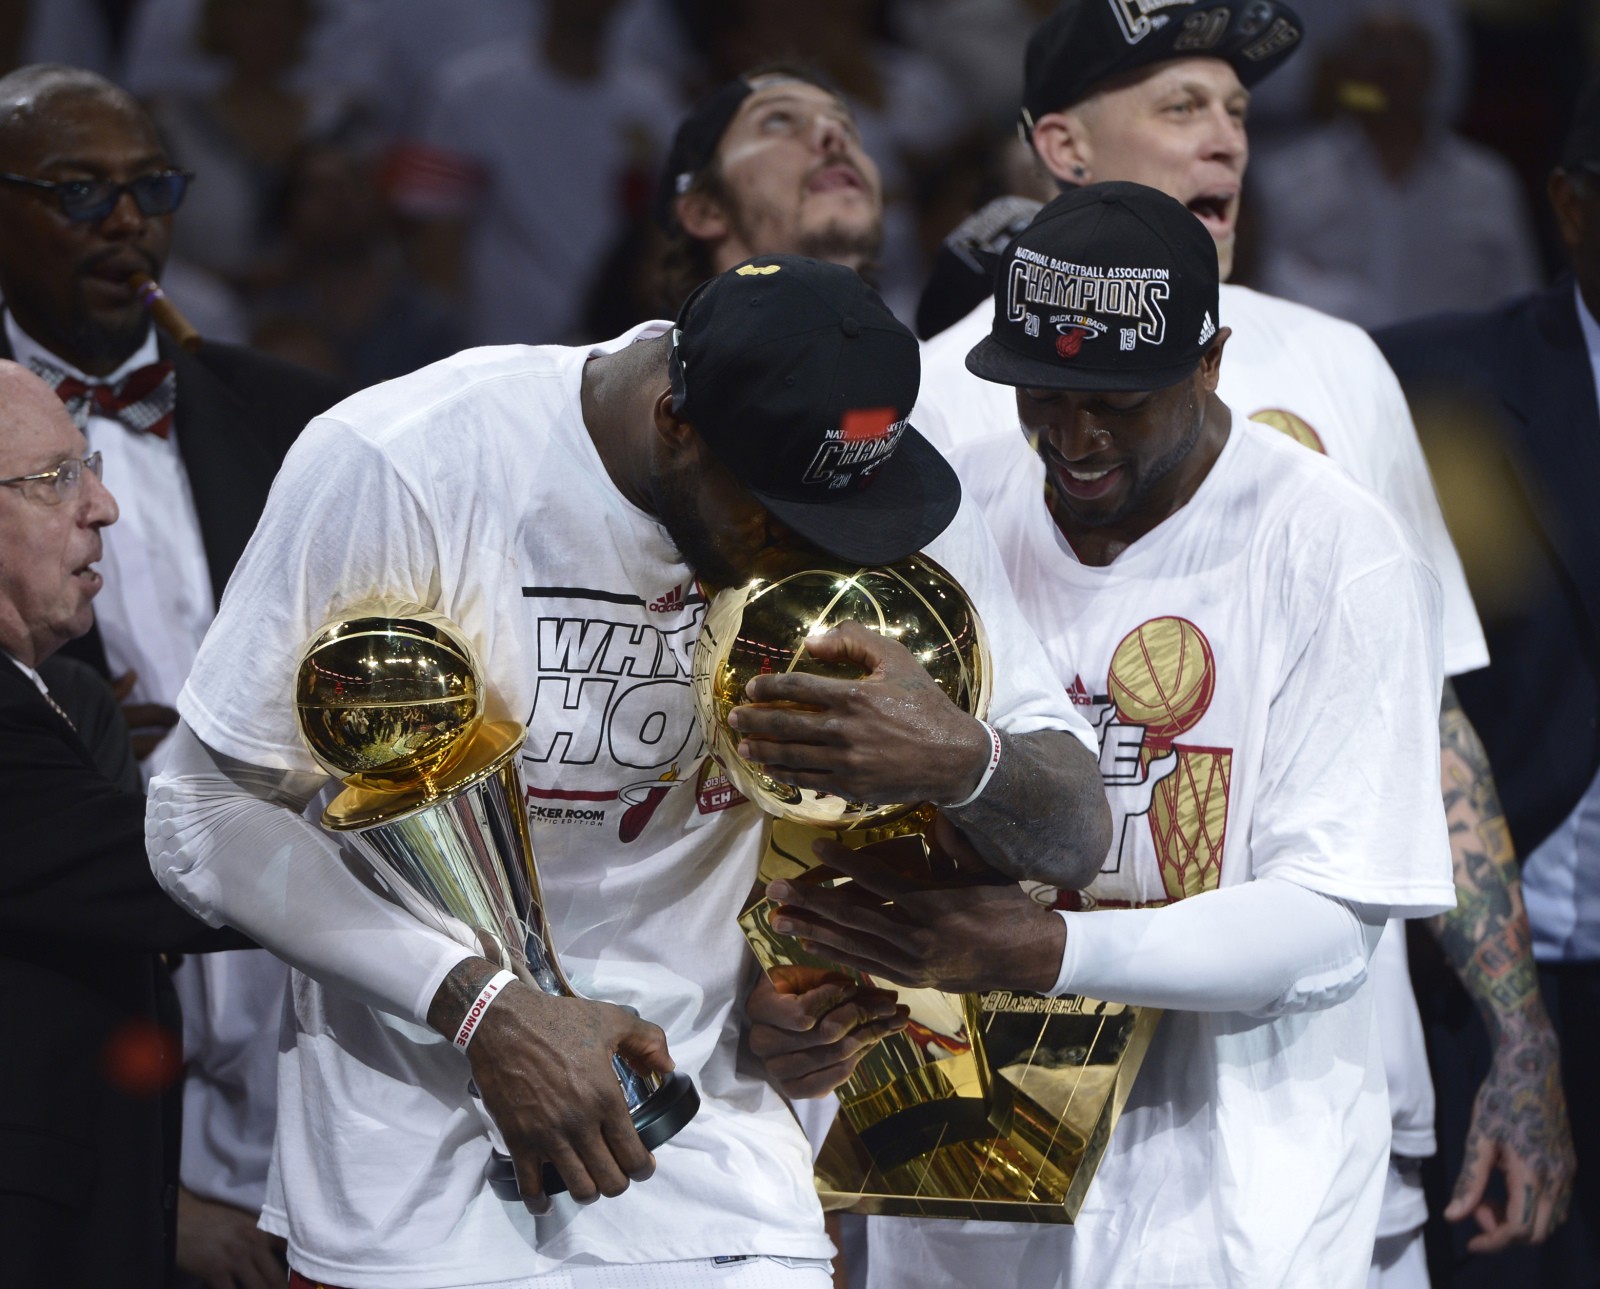 Where does this Finals MVP rank all-time in LeBron James’s career?